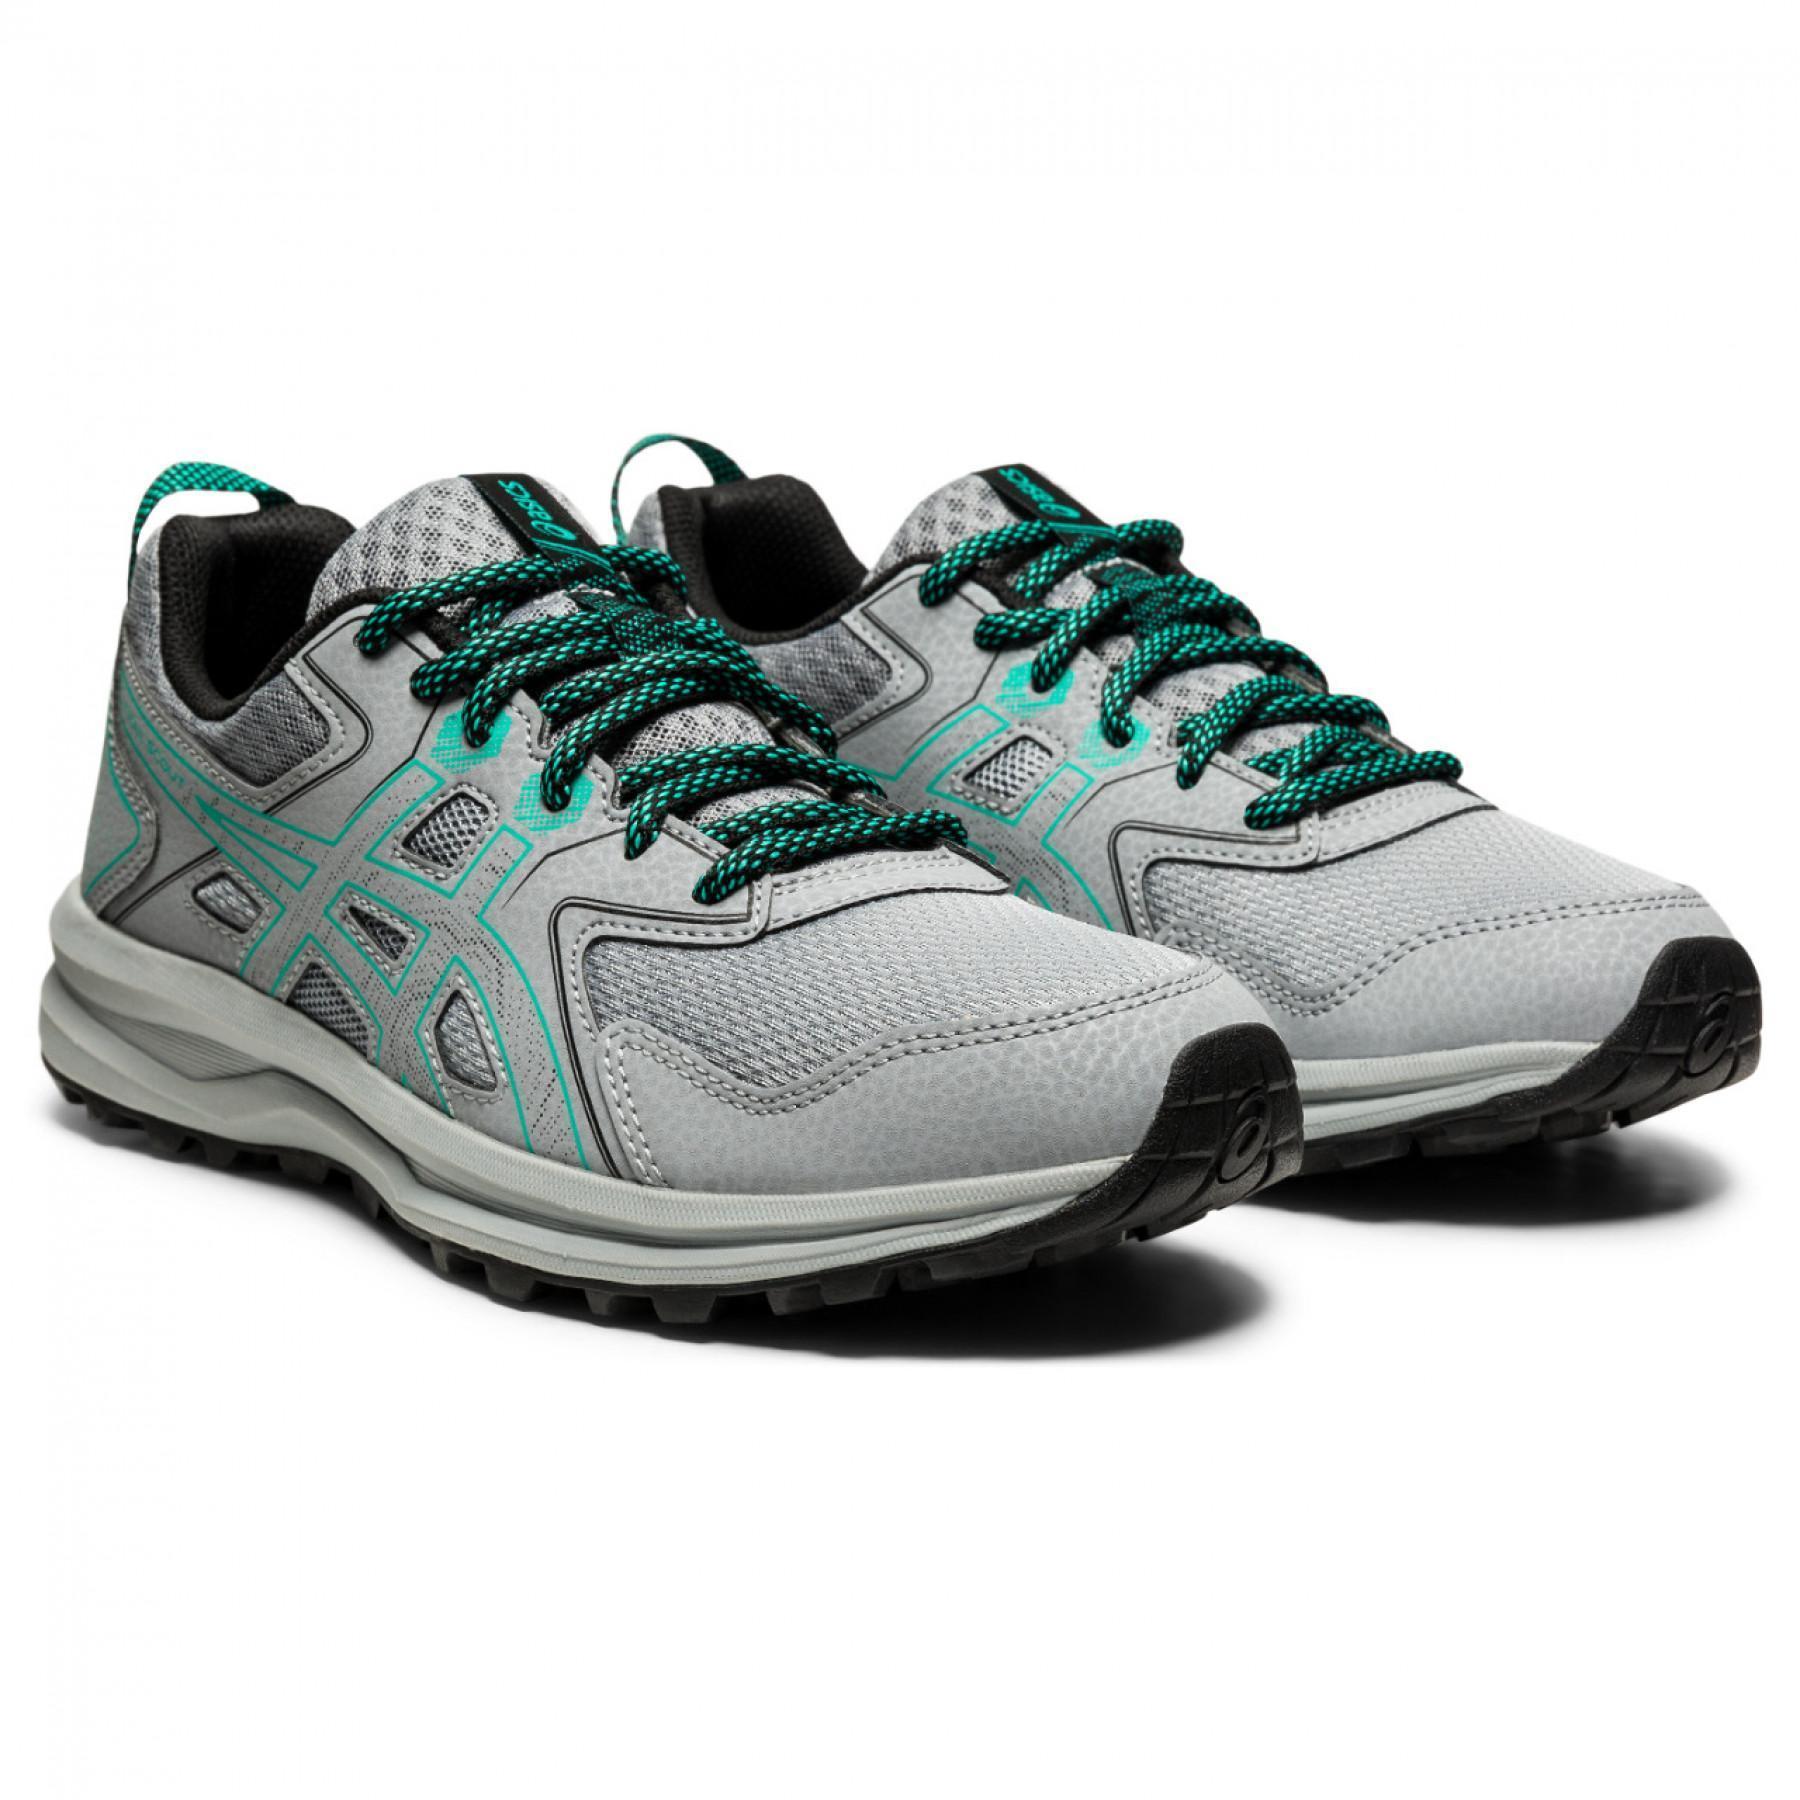 Zapatos de mujer Asics Trail Scout